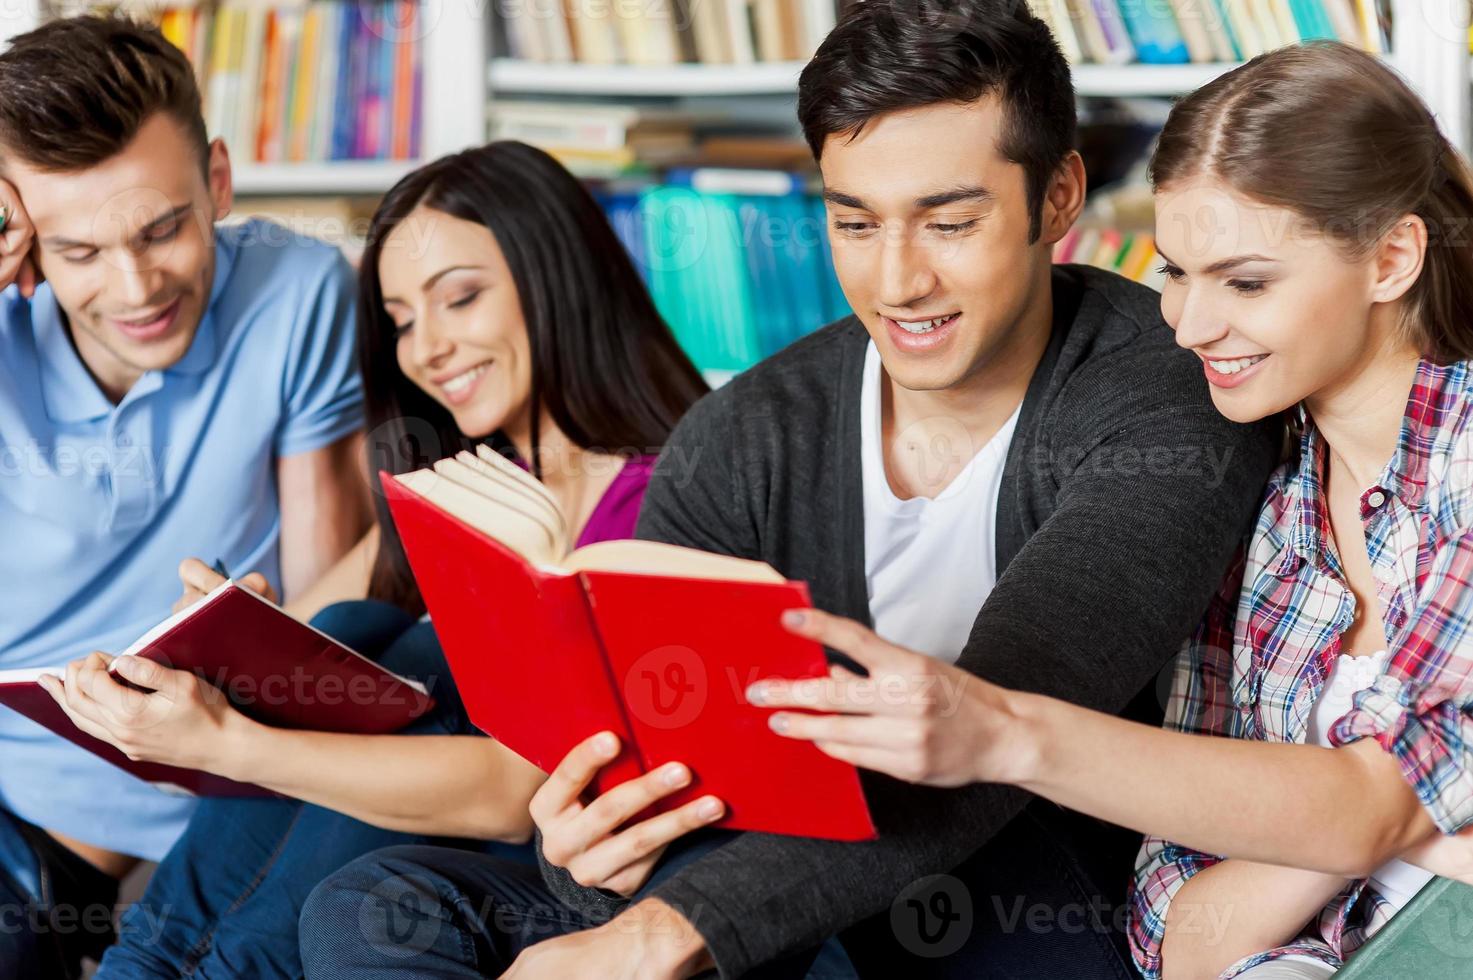 Students in library. Four cheerful students reading a book together while sitting against bookshelf in a library photo